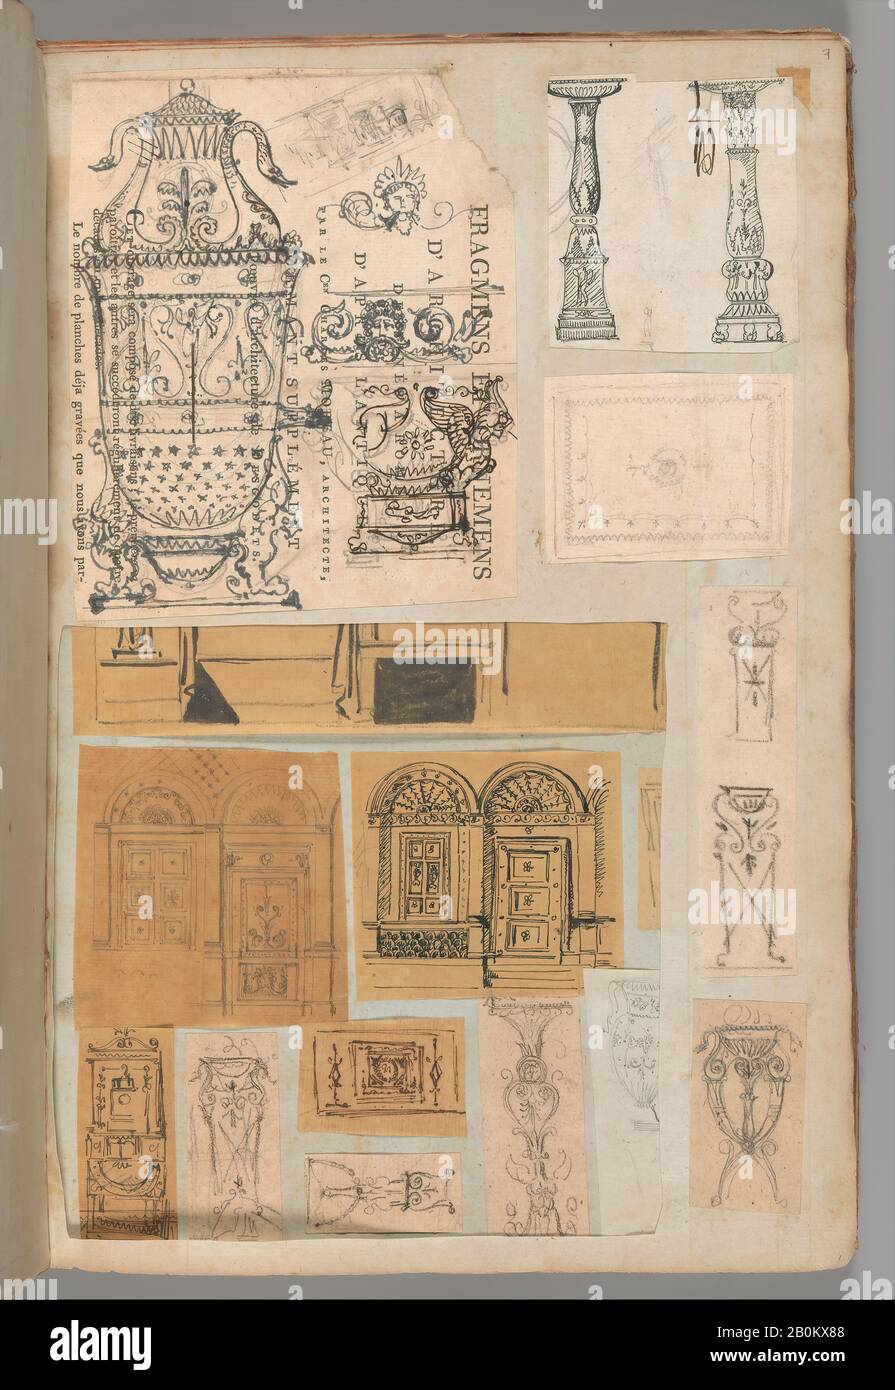 Workshop of Charles Percier, Page from a Scrapbook containing Drawings and Several Prints of Architecture, Interiors, Furniture and Other Objects, Workshop of Charles Percier (French, Paris 1764–1838 Paris), Workshop of Pierre François Léonard Fontaine (French, Pontoise 1762–1853 Paris), ca. 1800–1850, Pen and black and gray ink, graphite, black chalk, 15 11/16 x 10 in. (39.8 x 25.4 cm Stock Photo